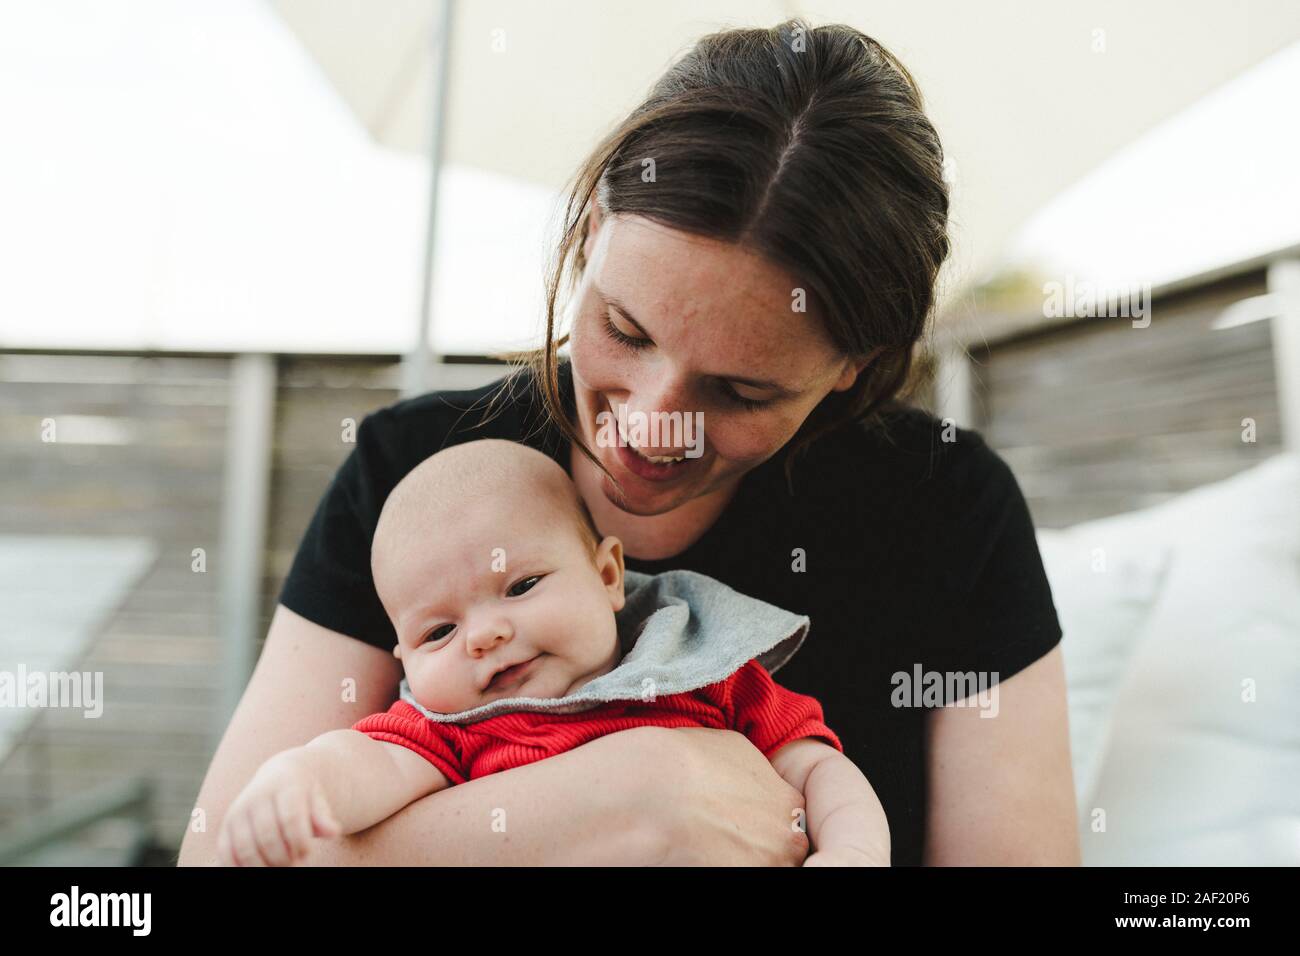 Mother with baby daughter Stock Photo